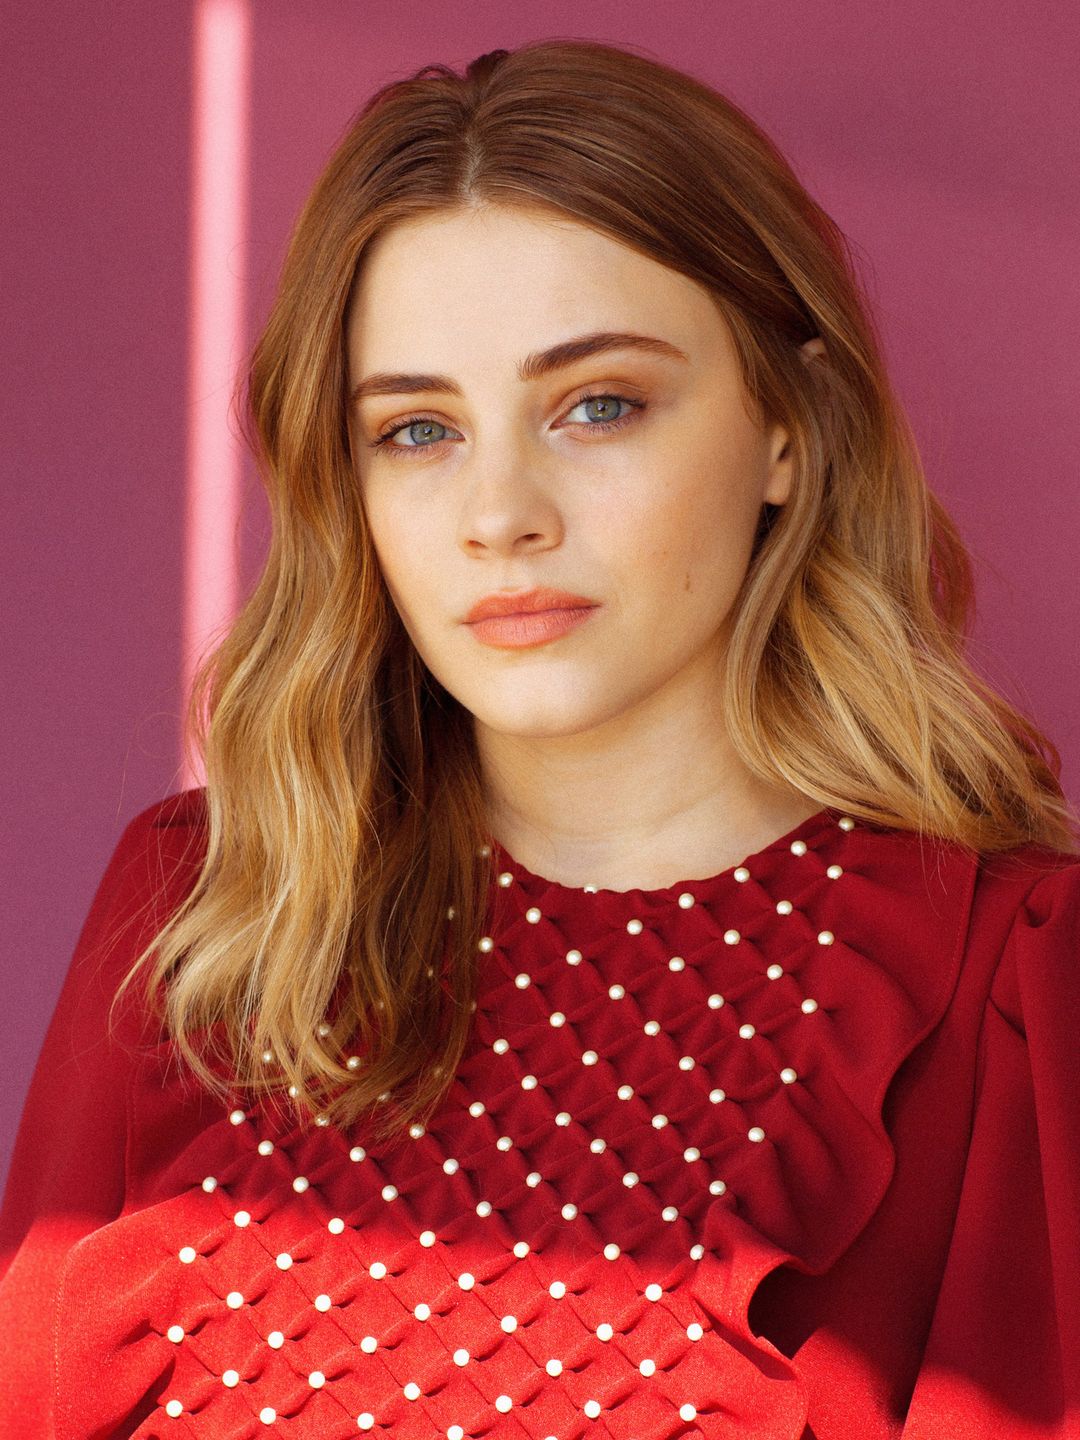 Josephine Langford who is she